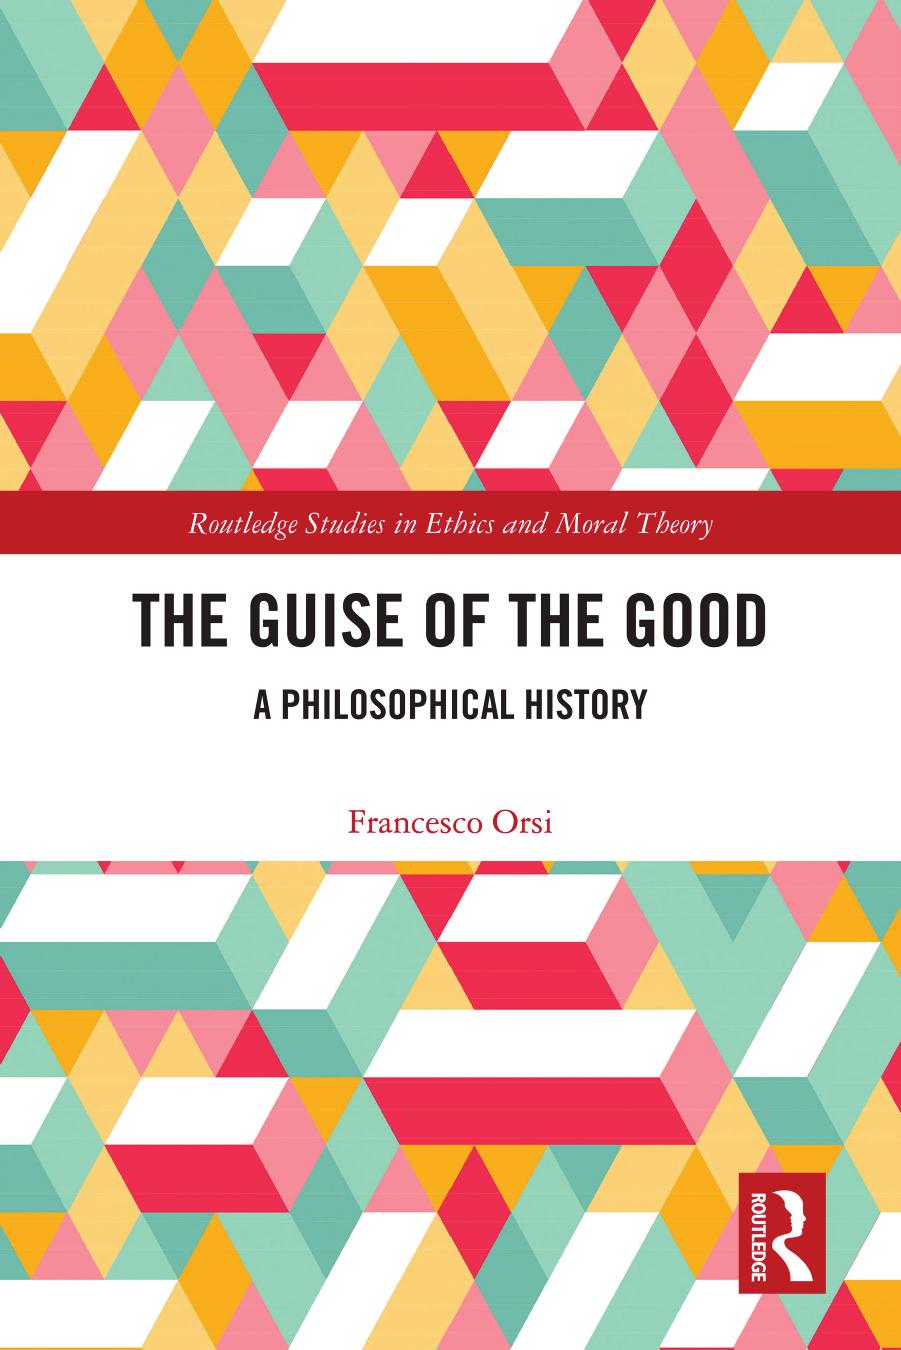 The Guise of the Good: A Philosophical History by Francesco Orsi